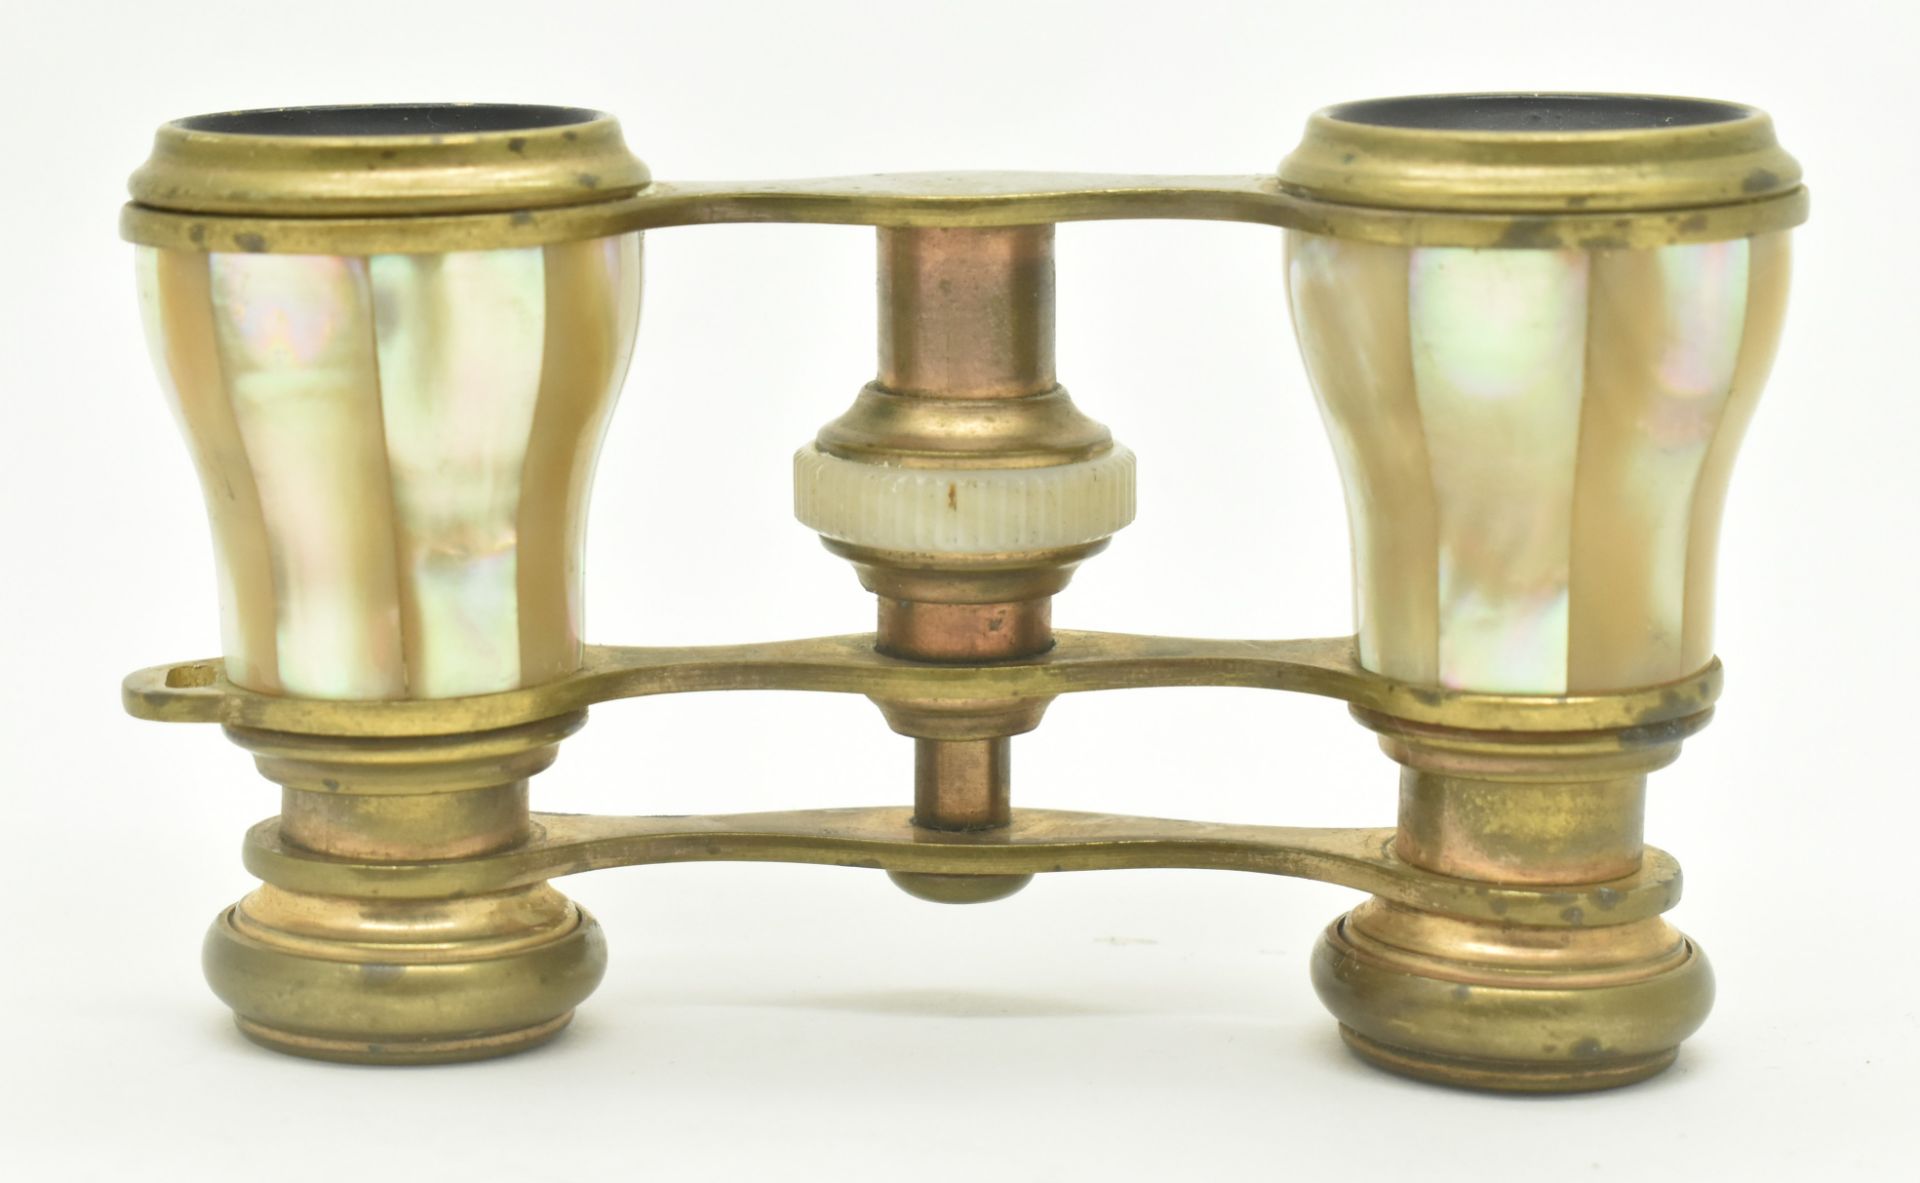 TWO PAIRS OF FRENCH MOTHER OF PEARL OPERA GLASSES - Image 7 of 7